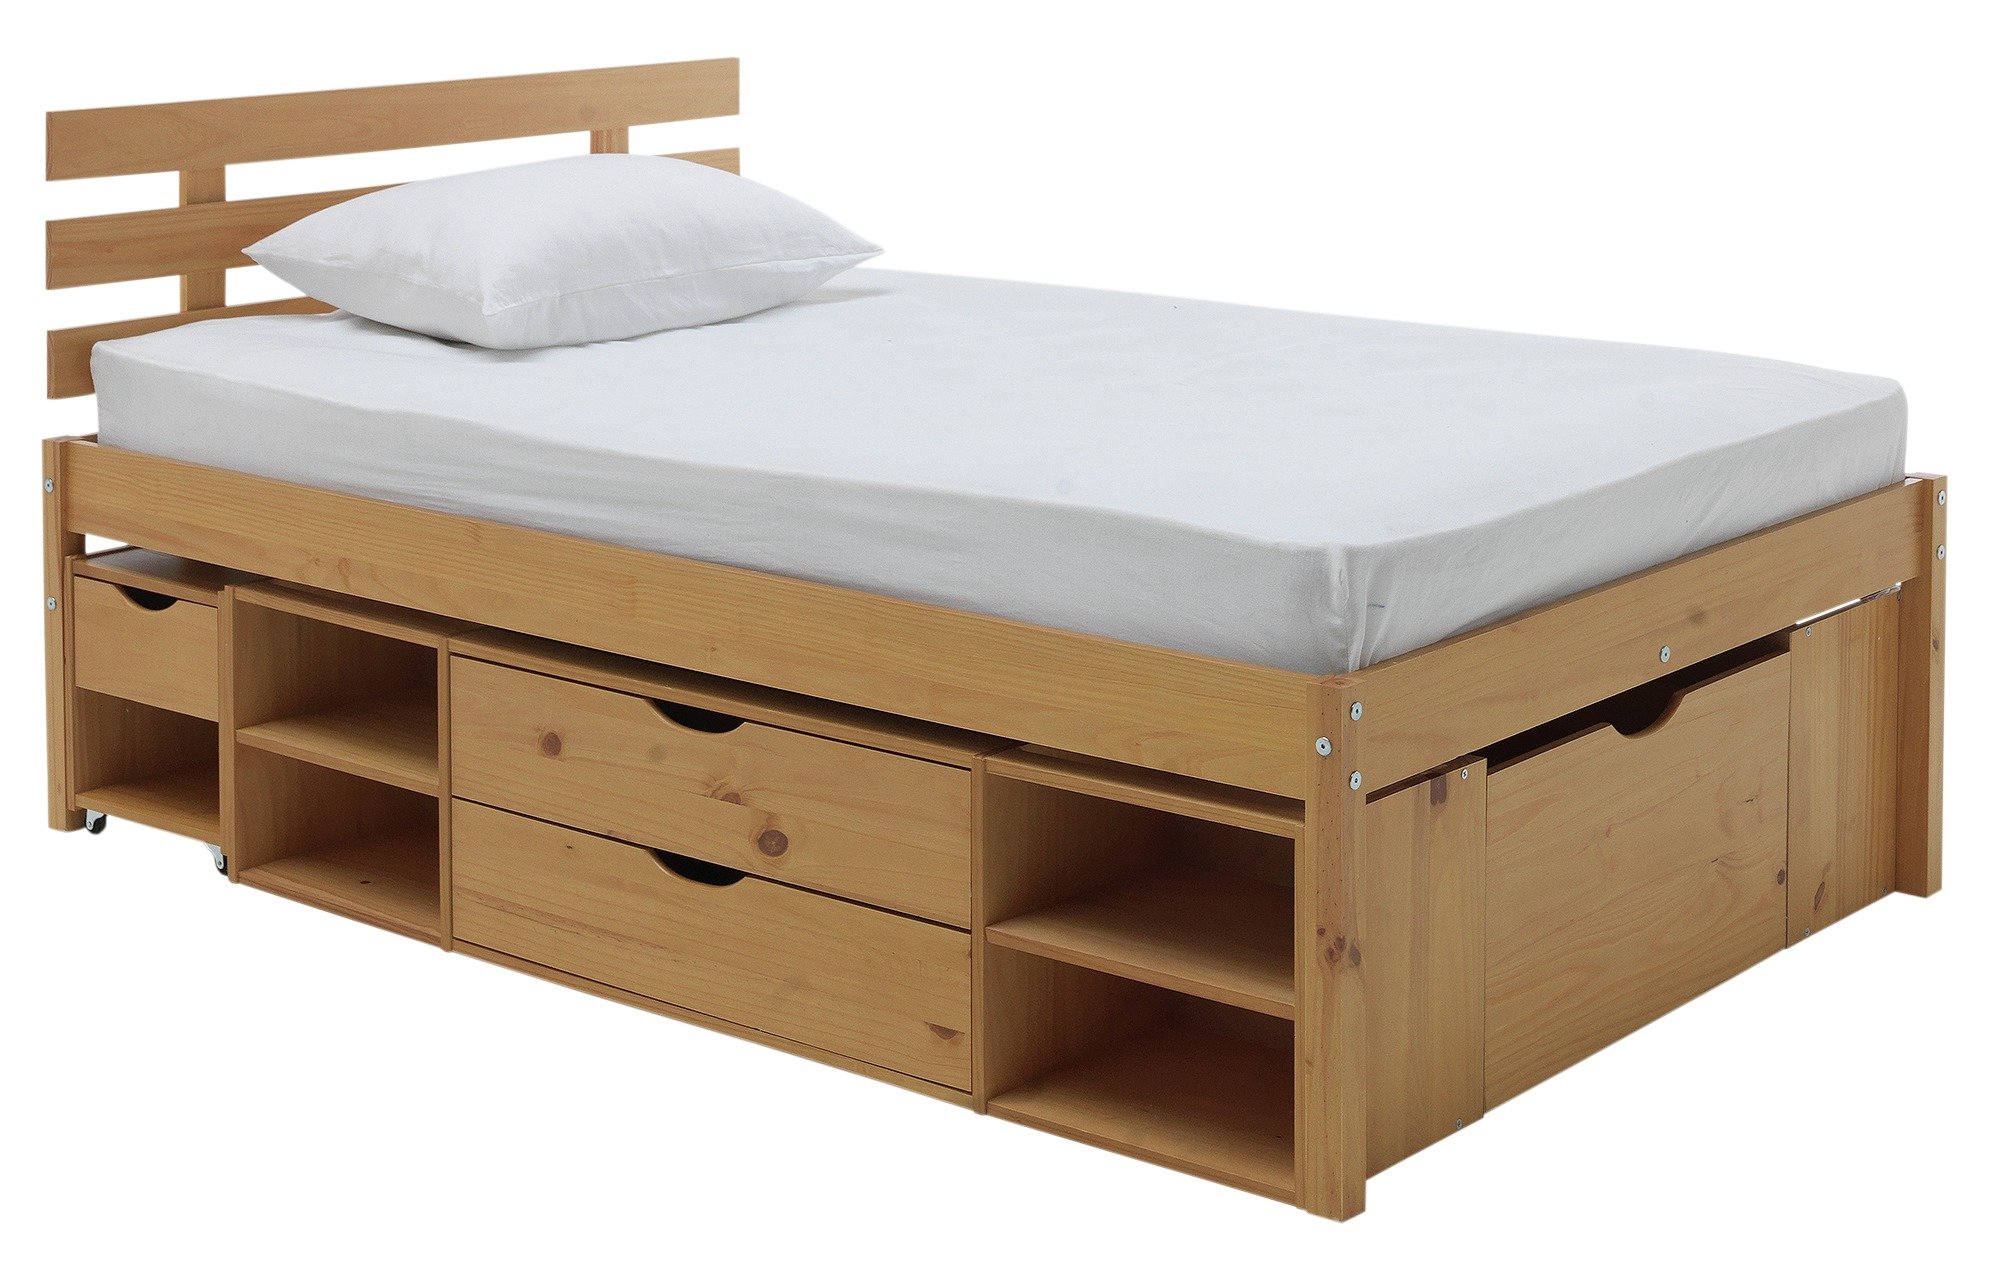 small double bed mattress and boxspring